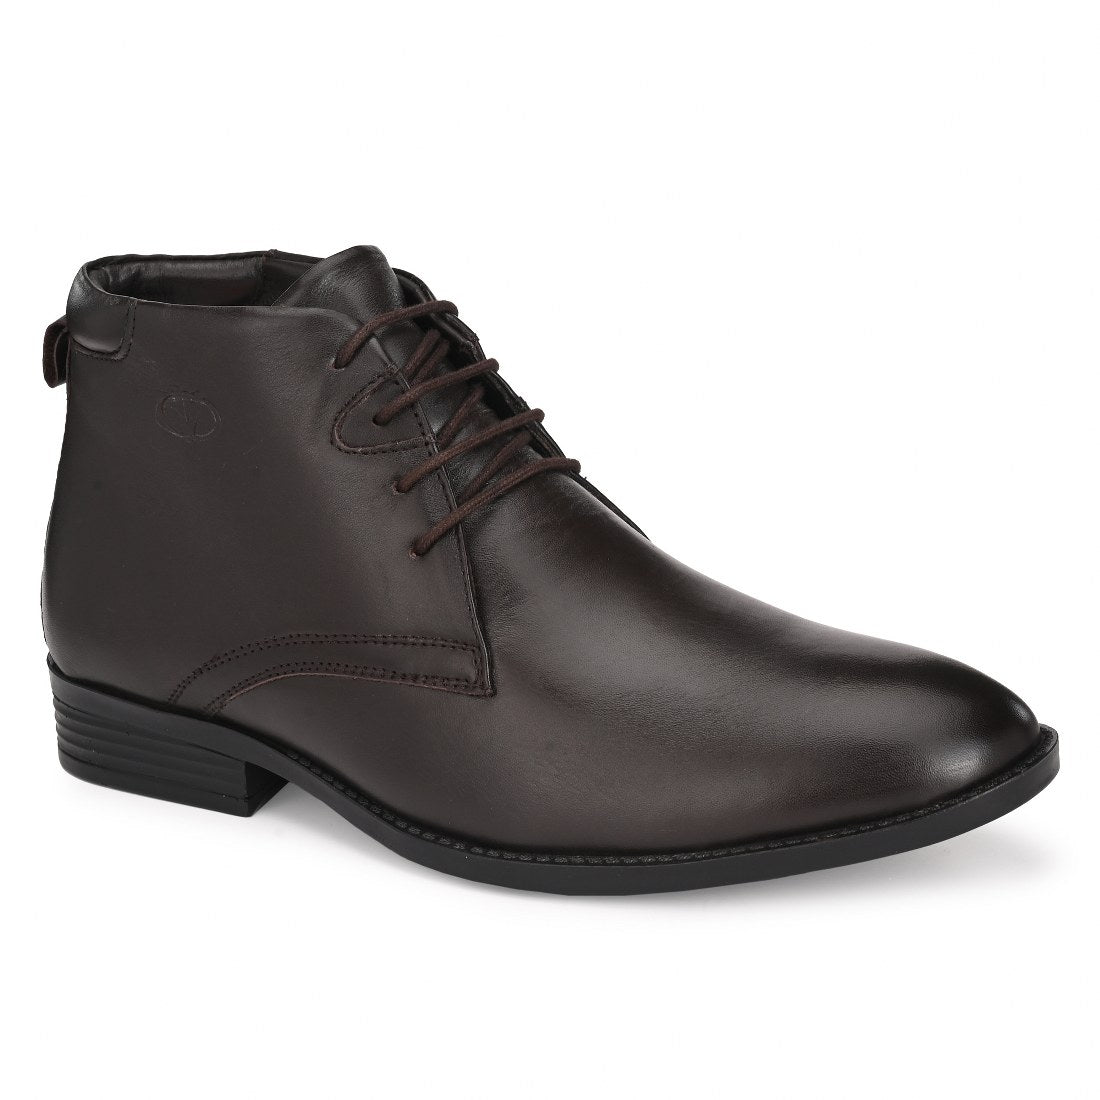 AMAZONA-75B MEN LEATHER BROWN FORMAL BOOT ANKLE DERBY